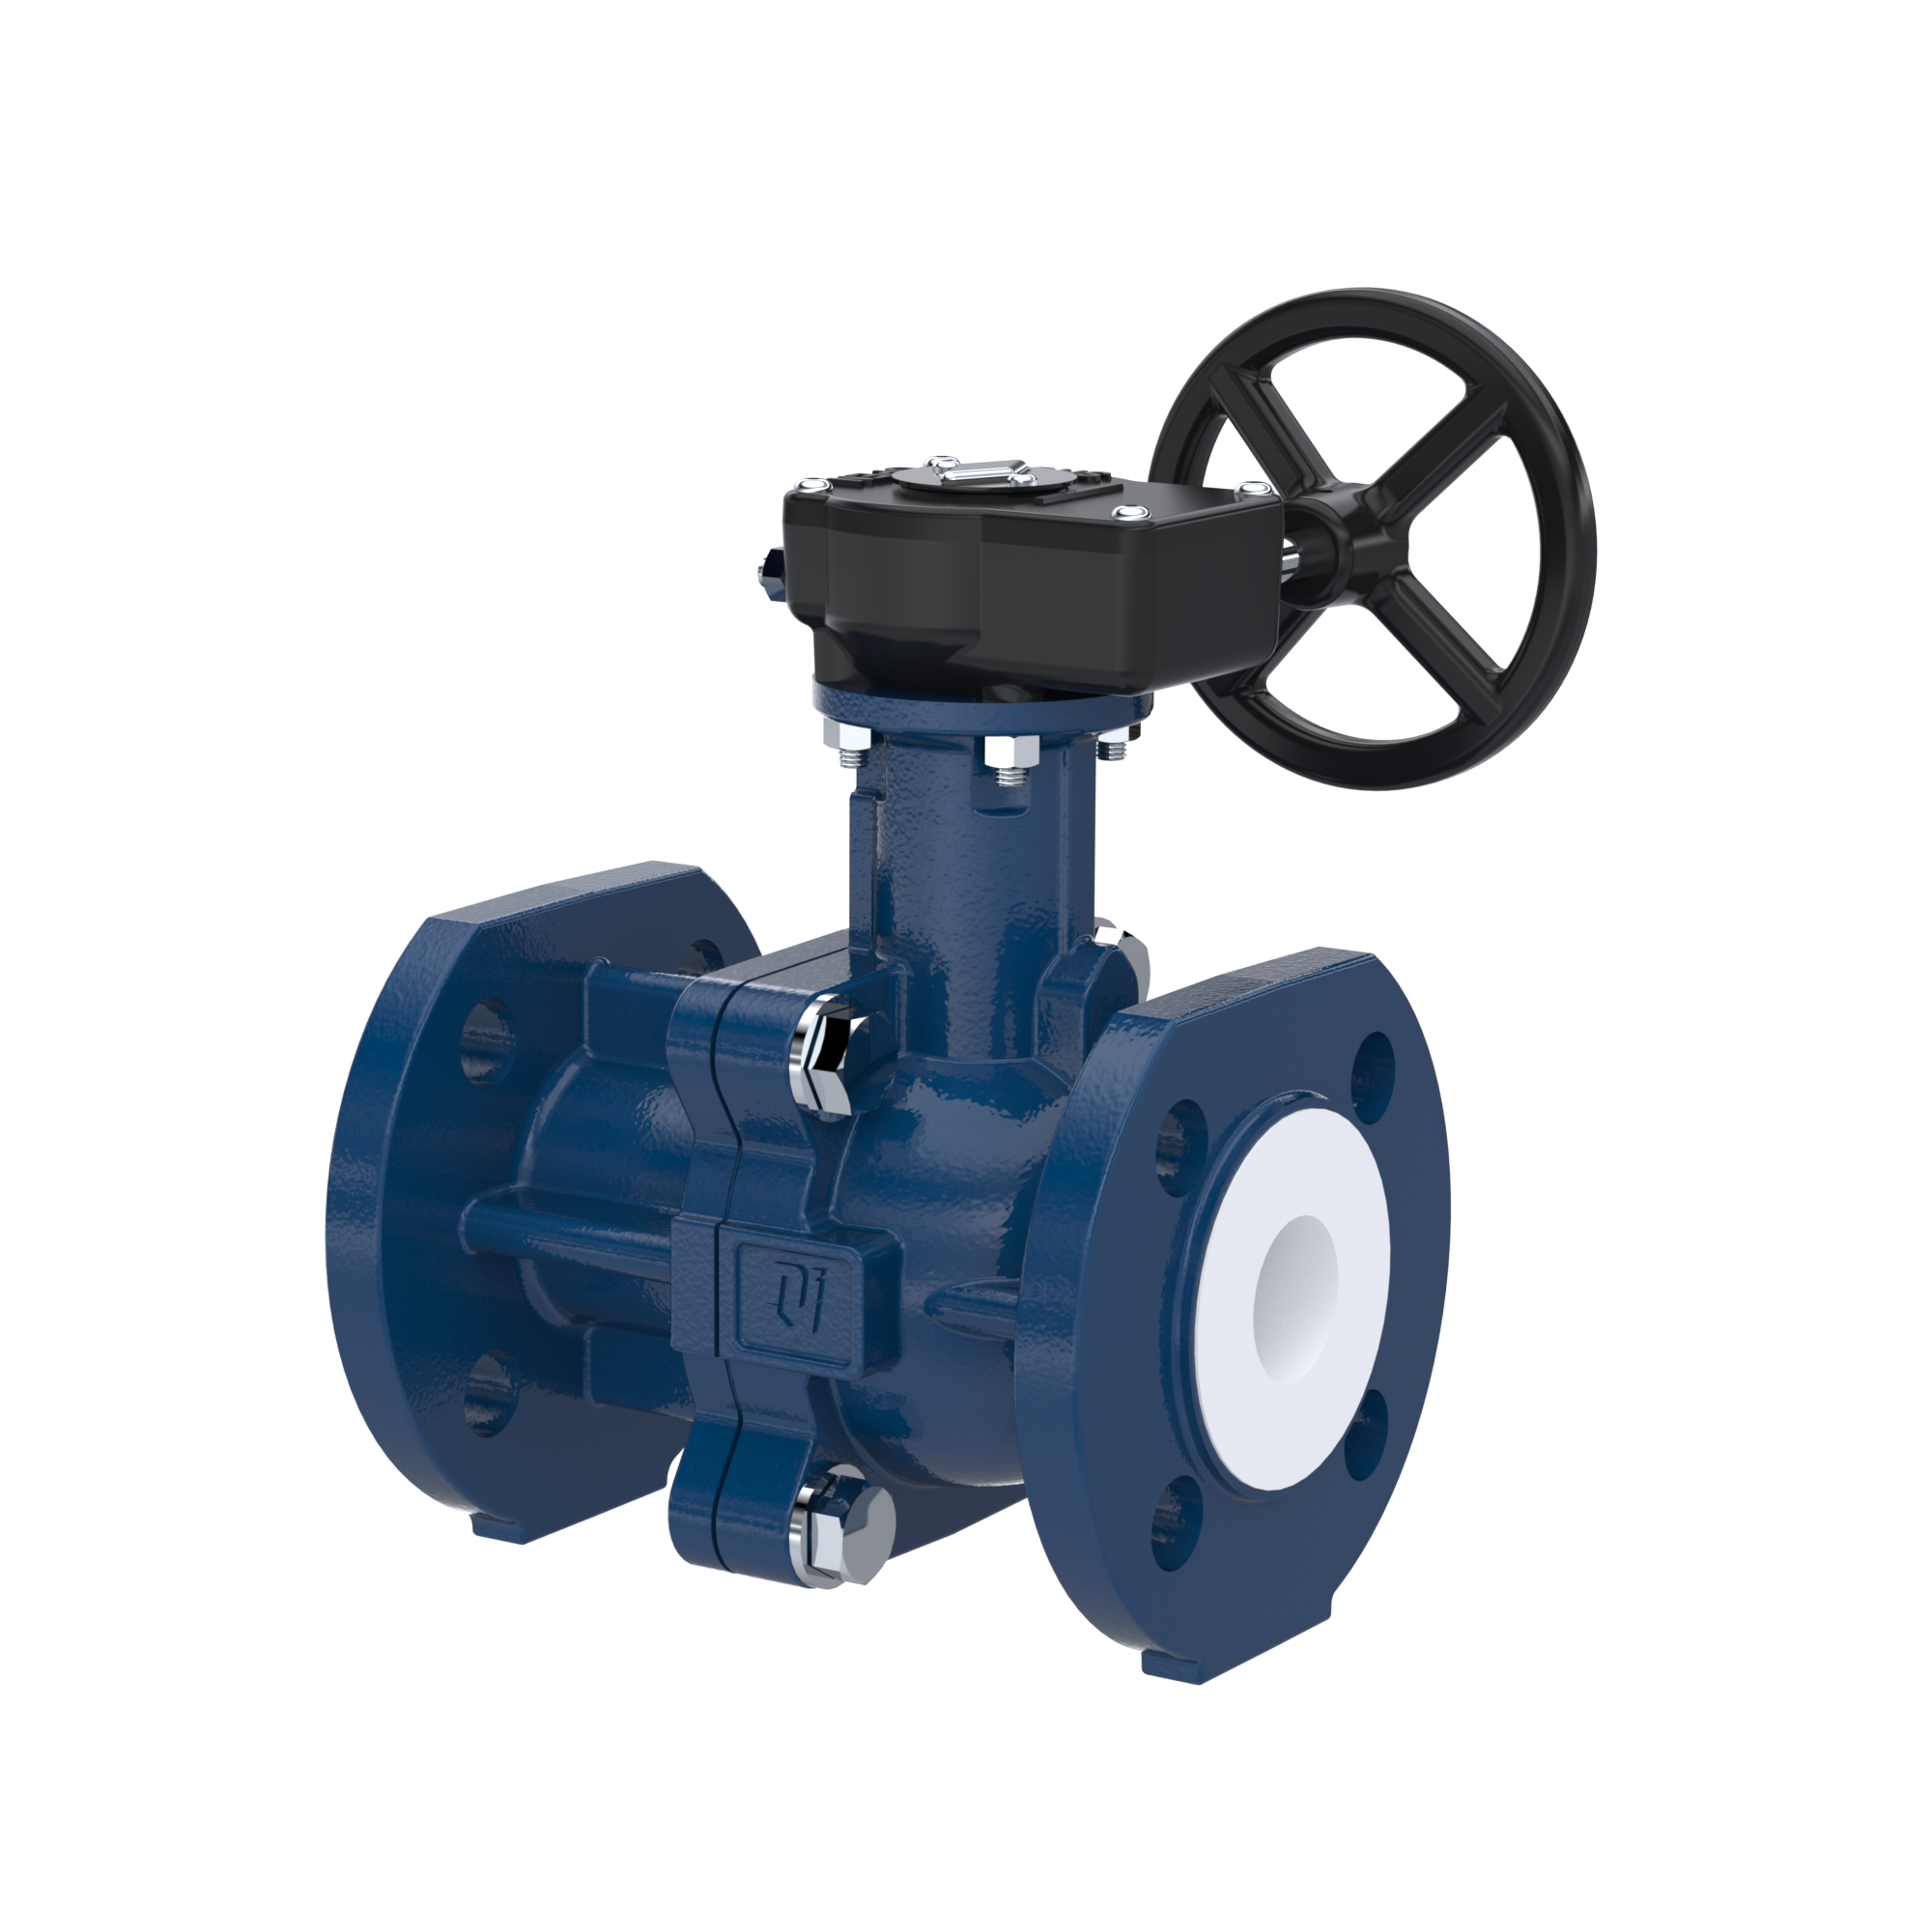 PFA-flange ball valve FK13 DN25 - 1" inch PN10/16 made of spheroidal graphite cast iron with worm gear